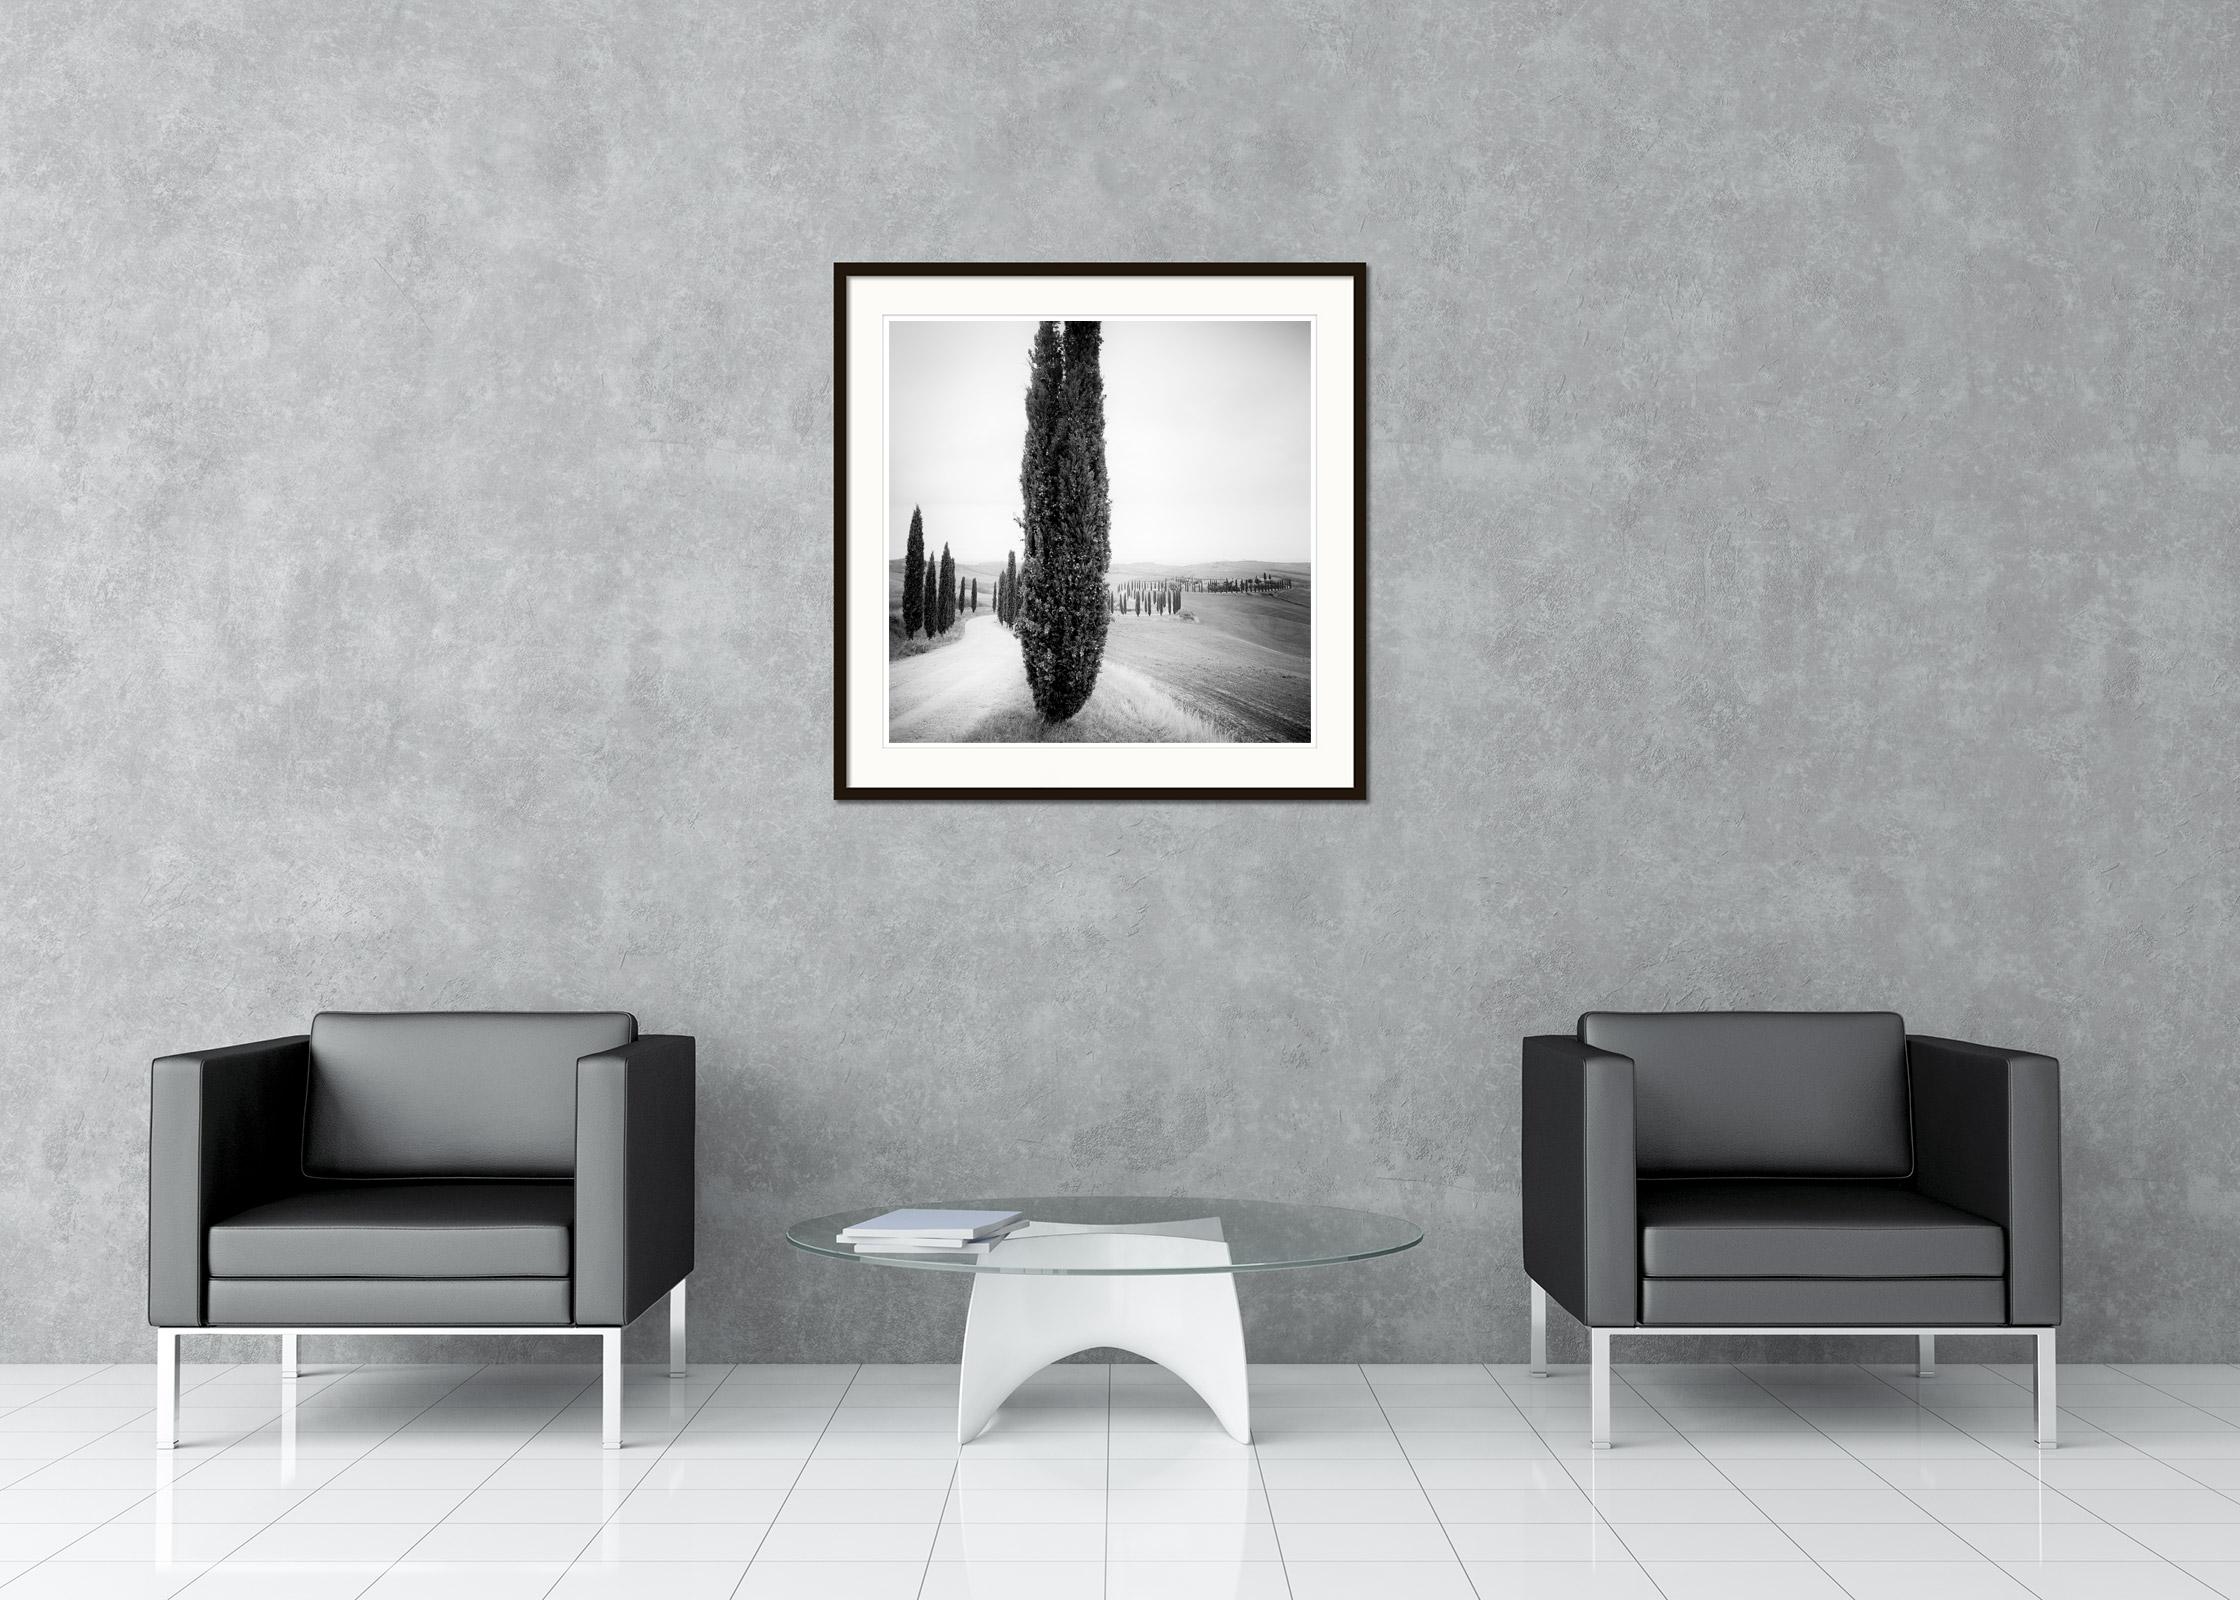 Cypress Trees, Tree Avenue, Tuscany, black and white art landscape photography - Contemporary Photograph by Gerald Berghammer